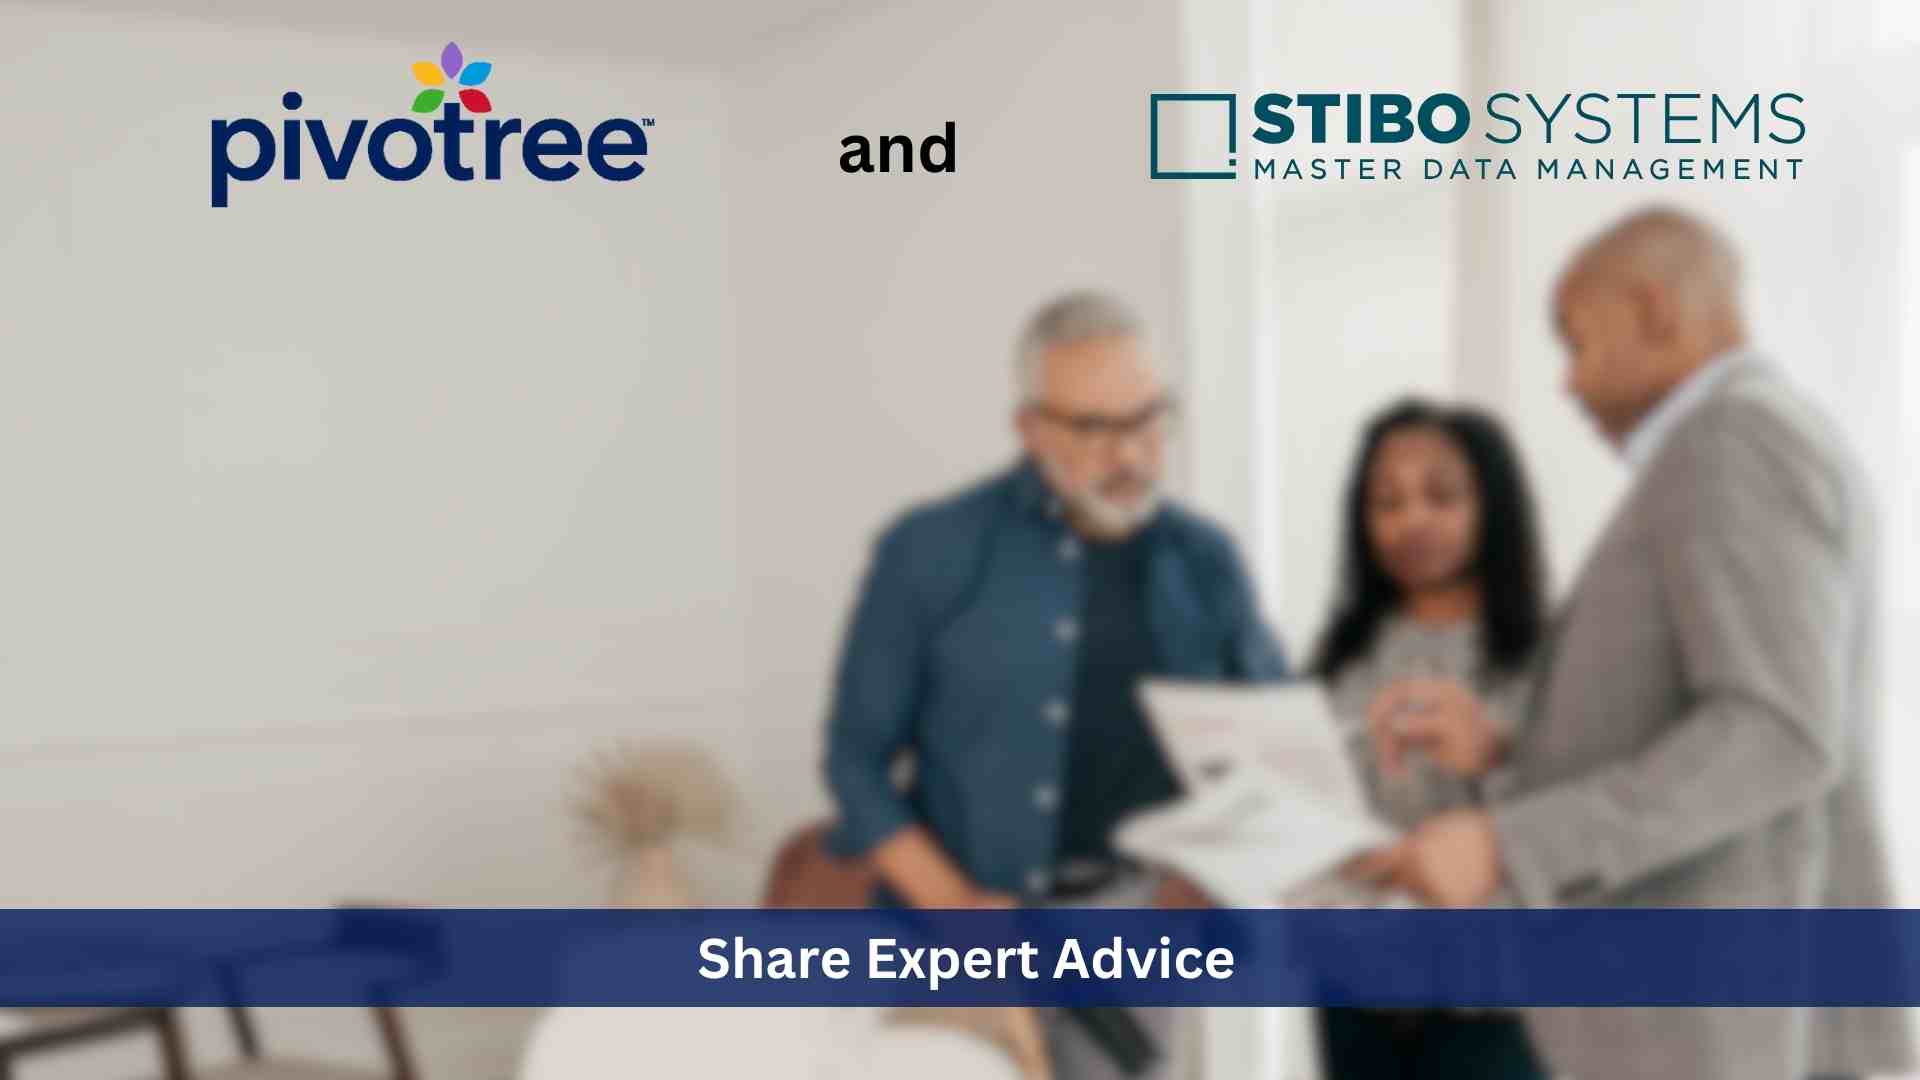 Pivotree and Stibo Systems Share Expert Advice on How Businesses Can Use Master Data Management (MDM) to Harness ESG Data